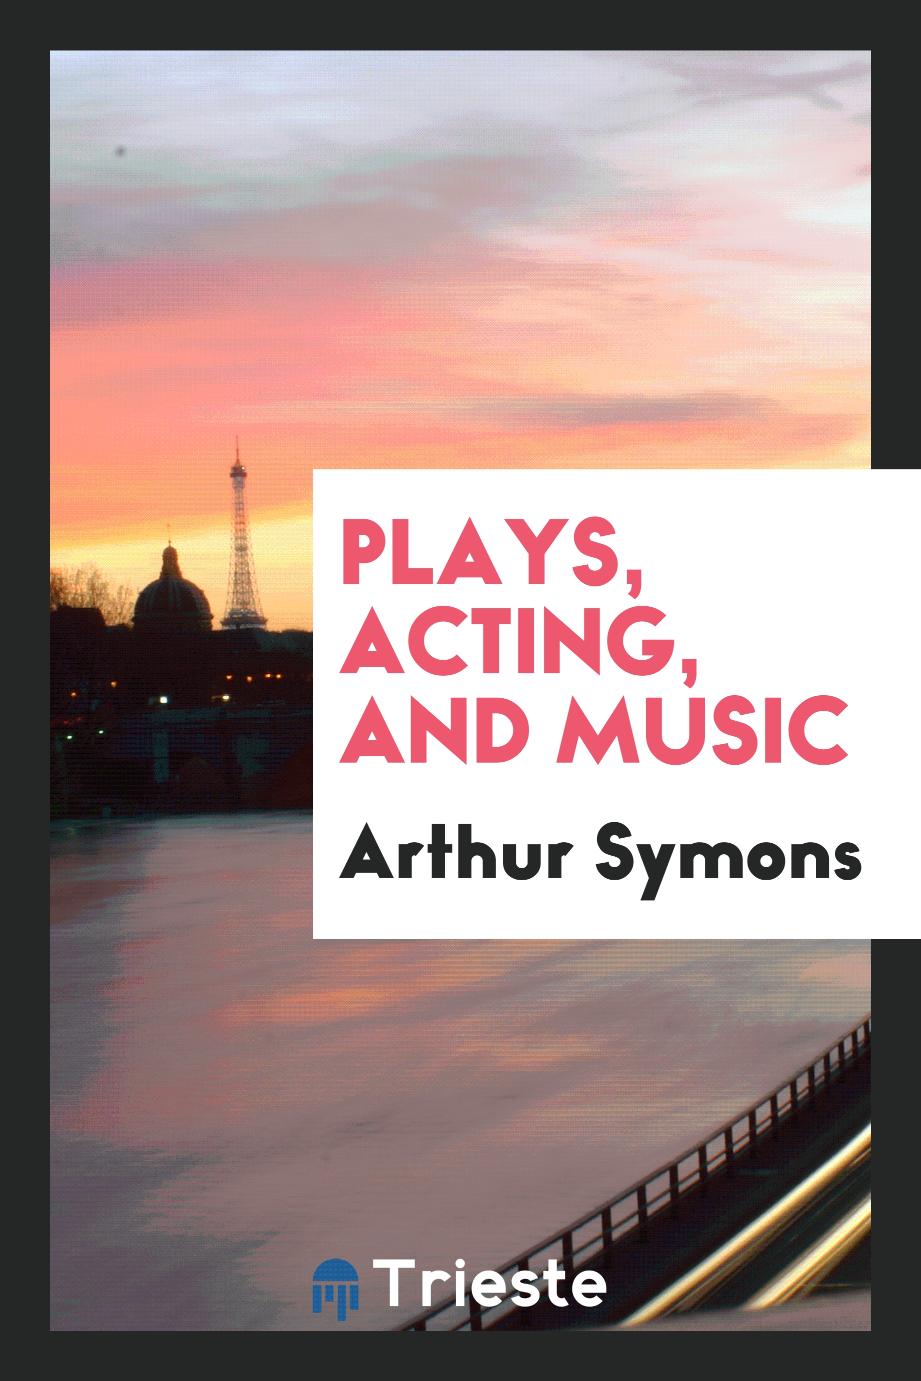 Plays, acting, and music